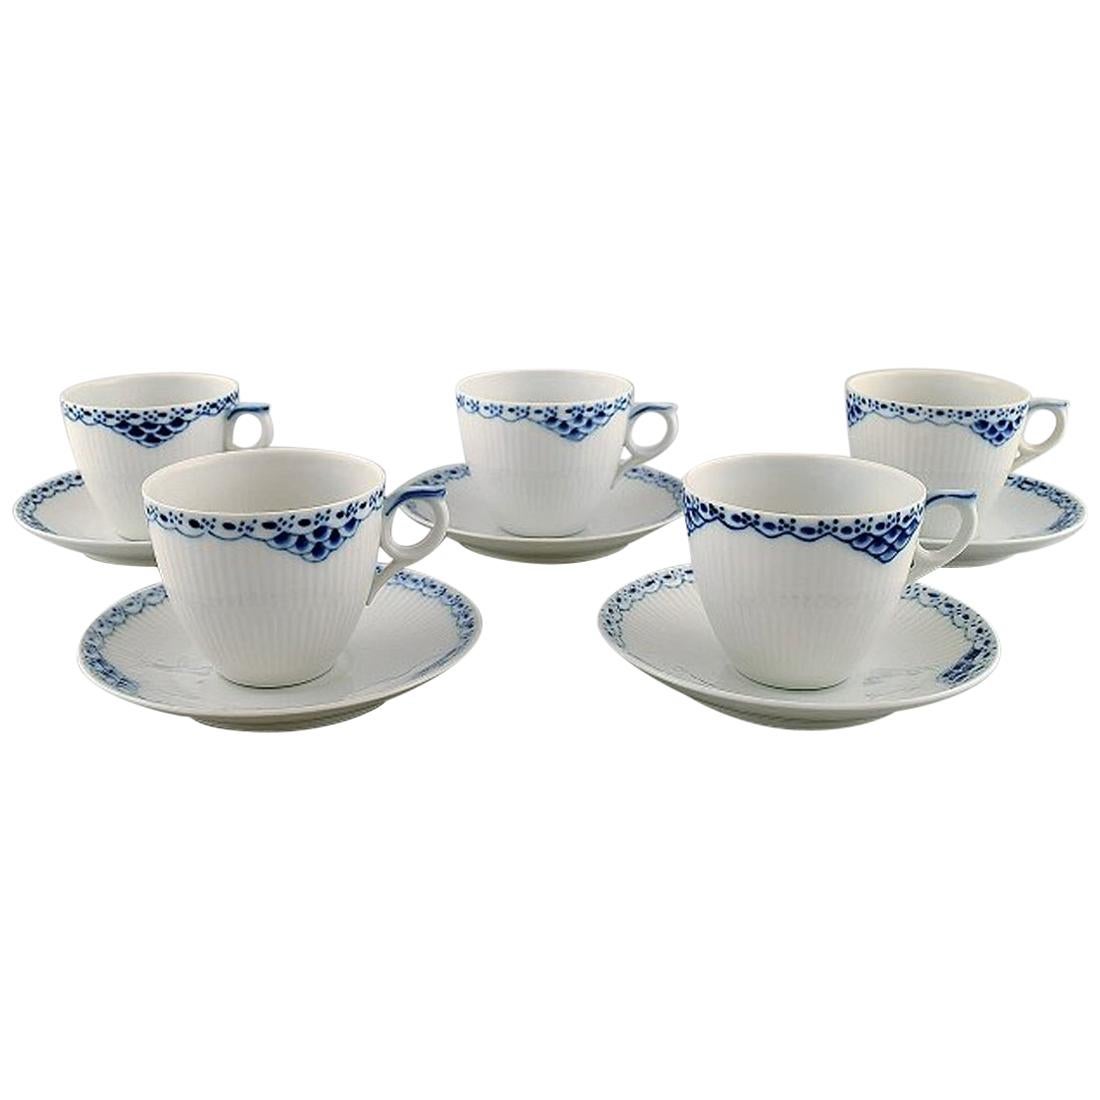 Royal Copenhagen Blue Painted Coffee Cup with Saucer in Porcelain, Set of 5